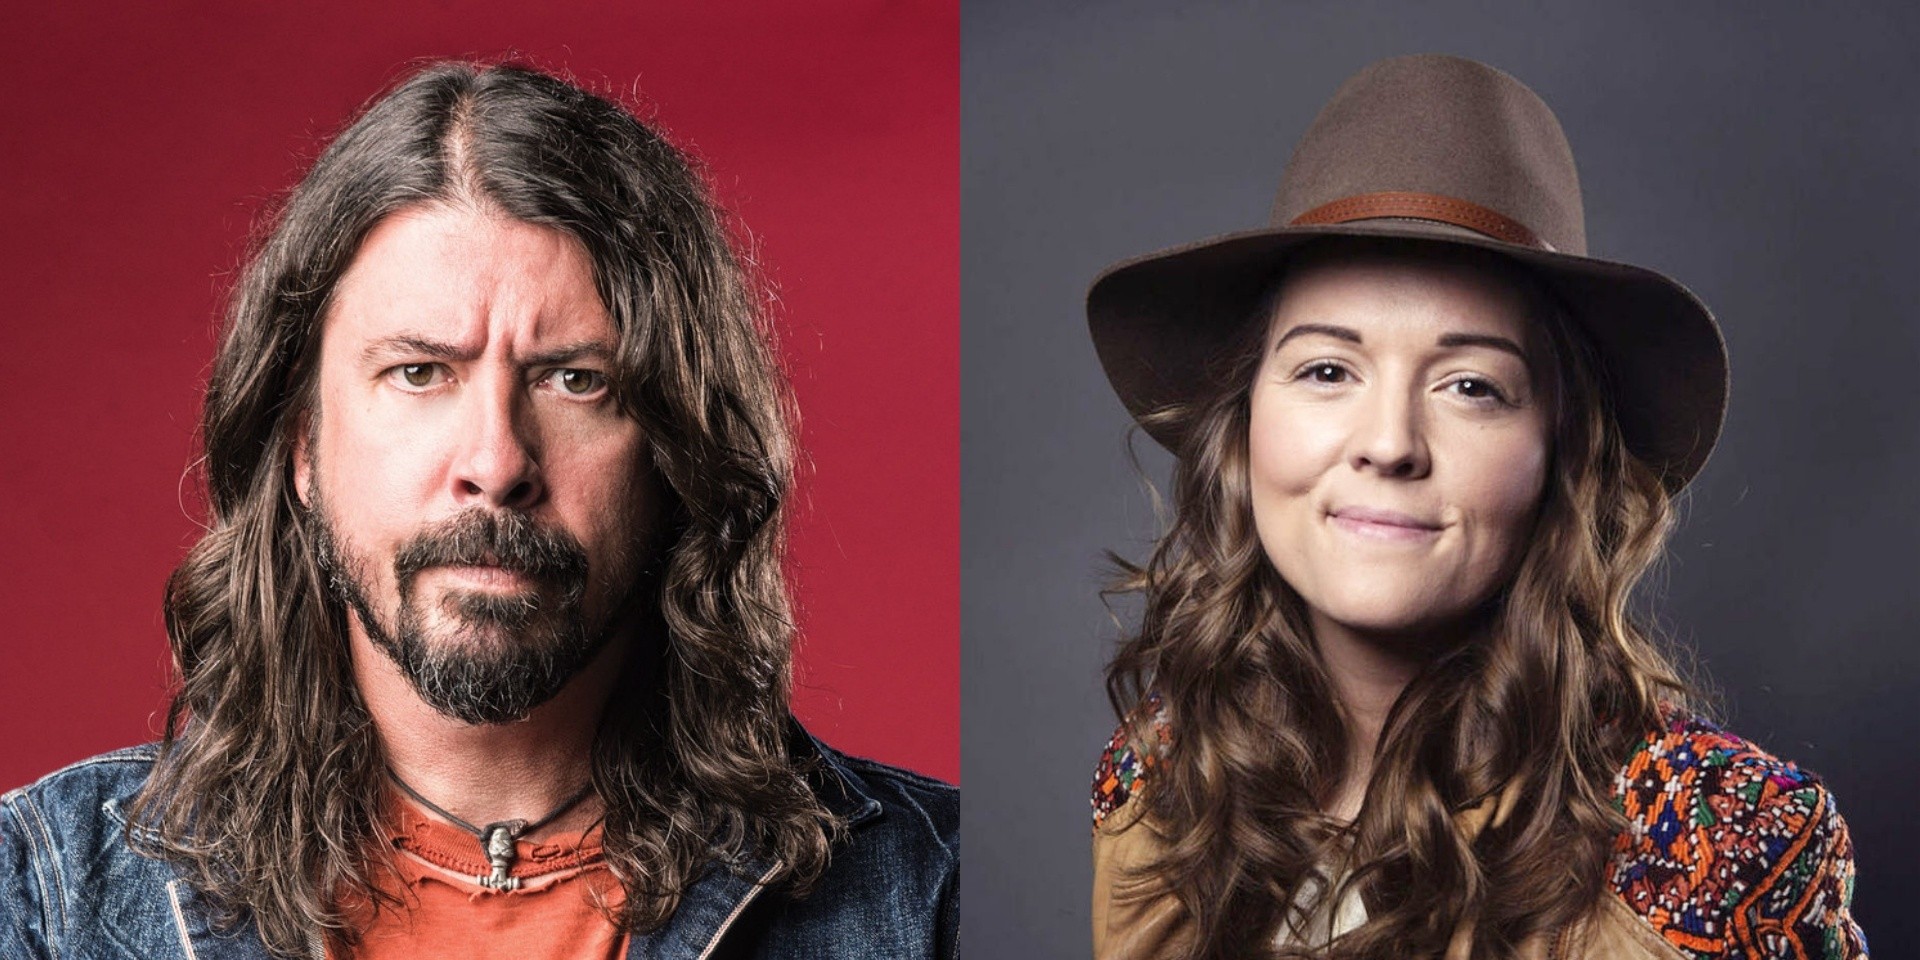 Brandi Carlile and Dave Grohl performed surprise busking session in Seattle